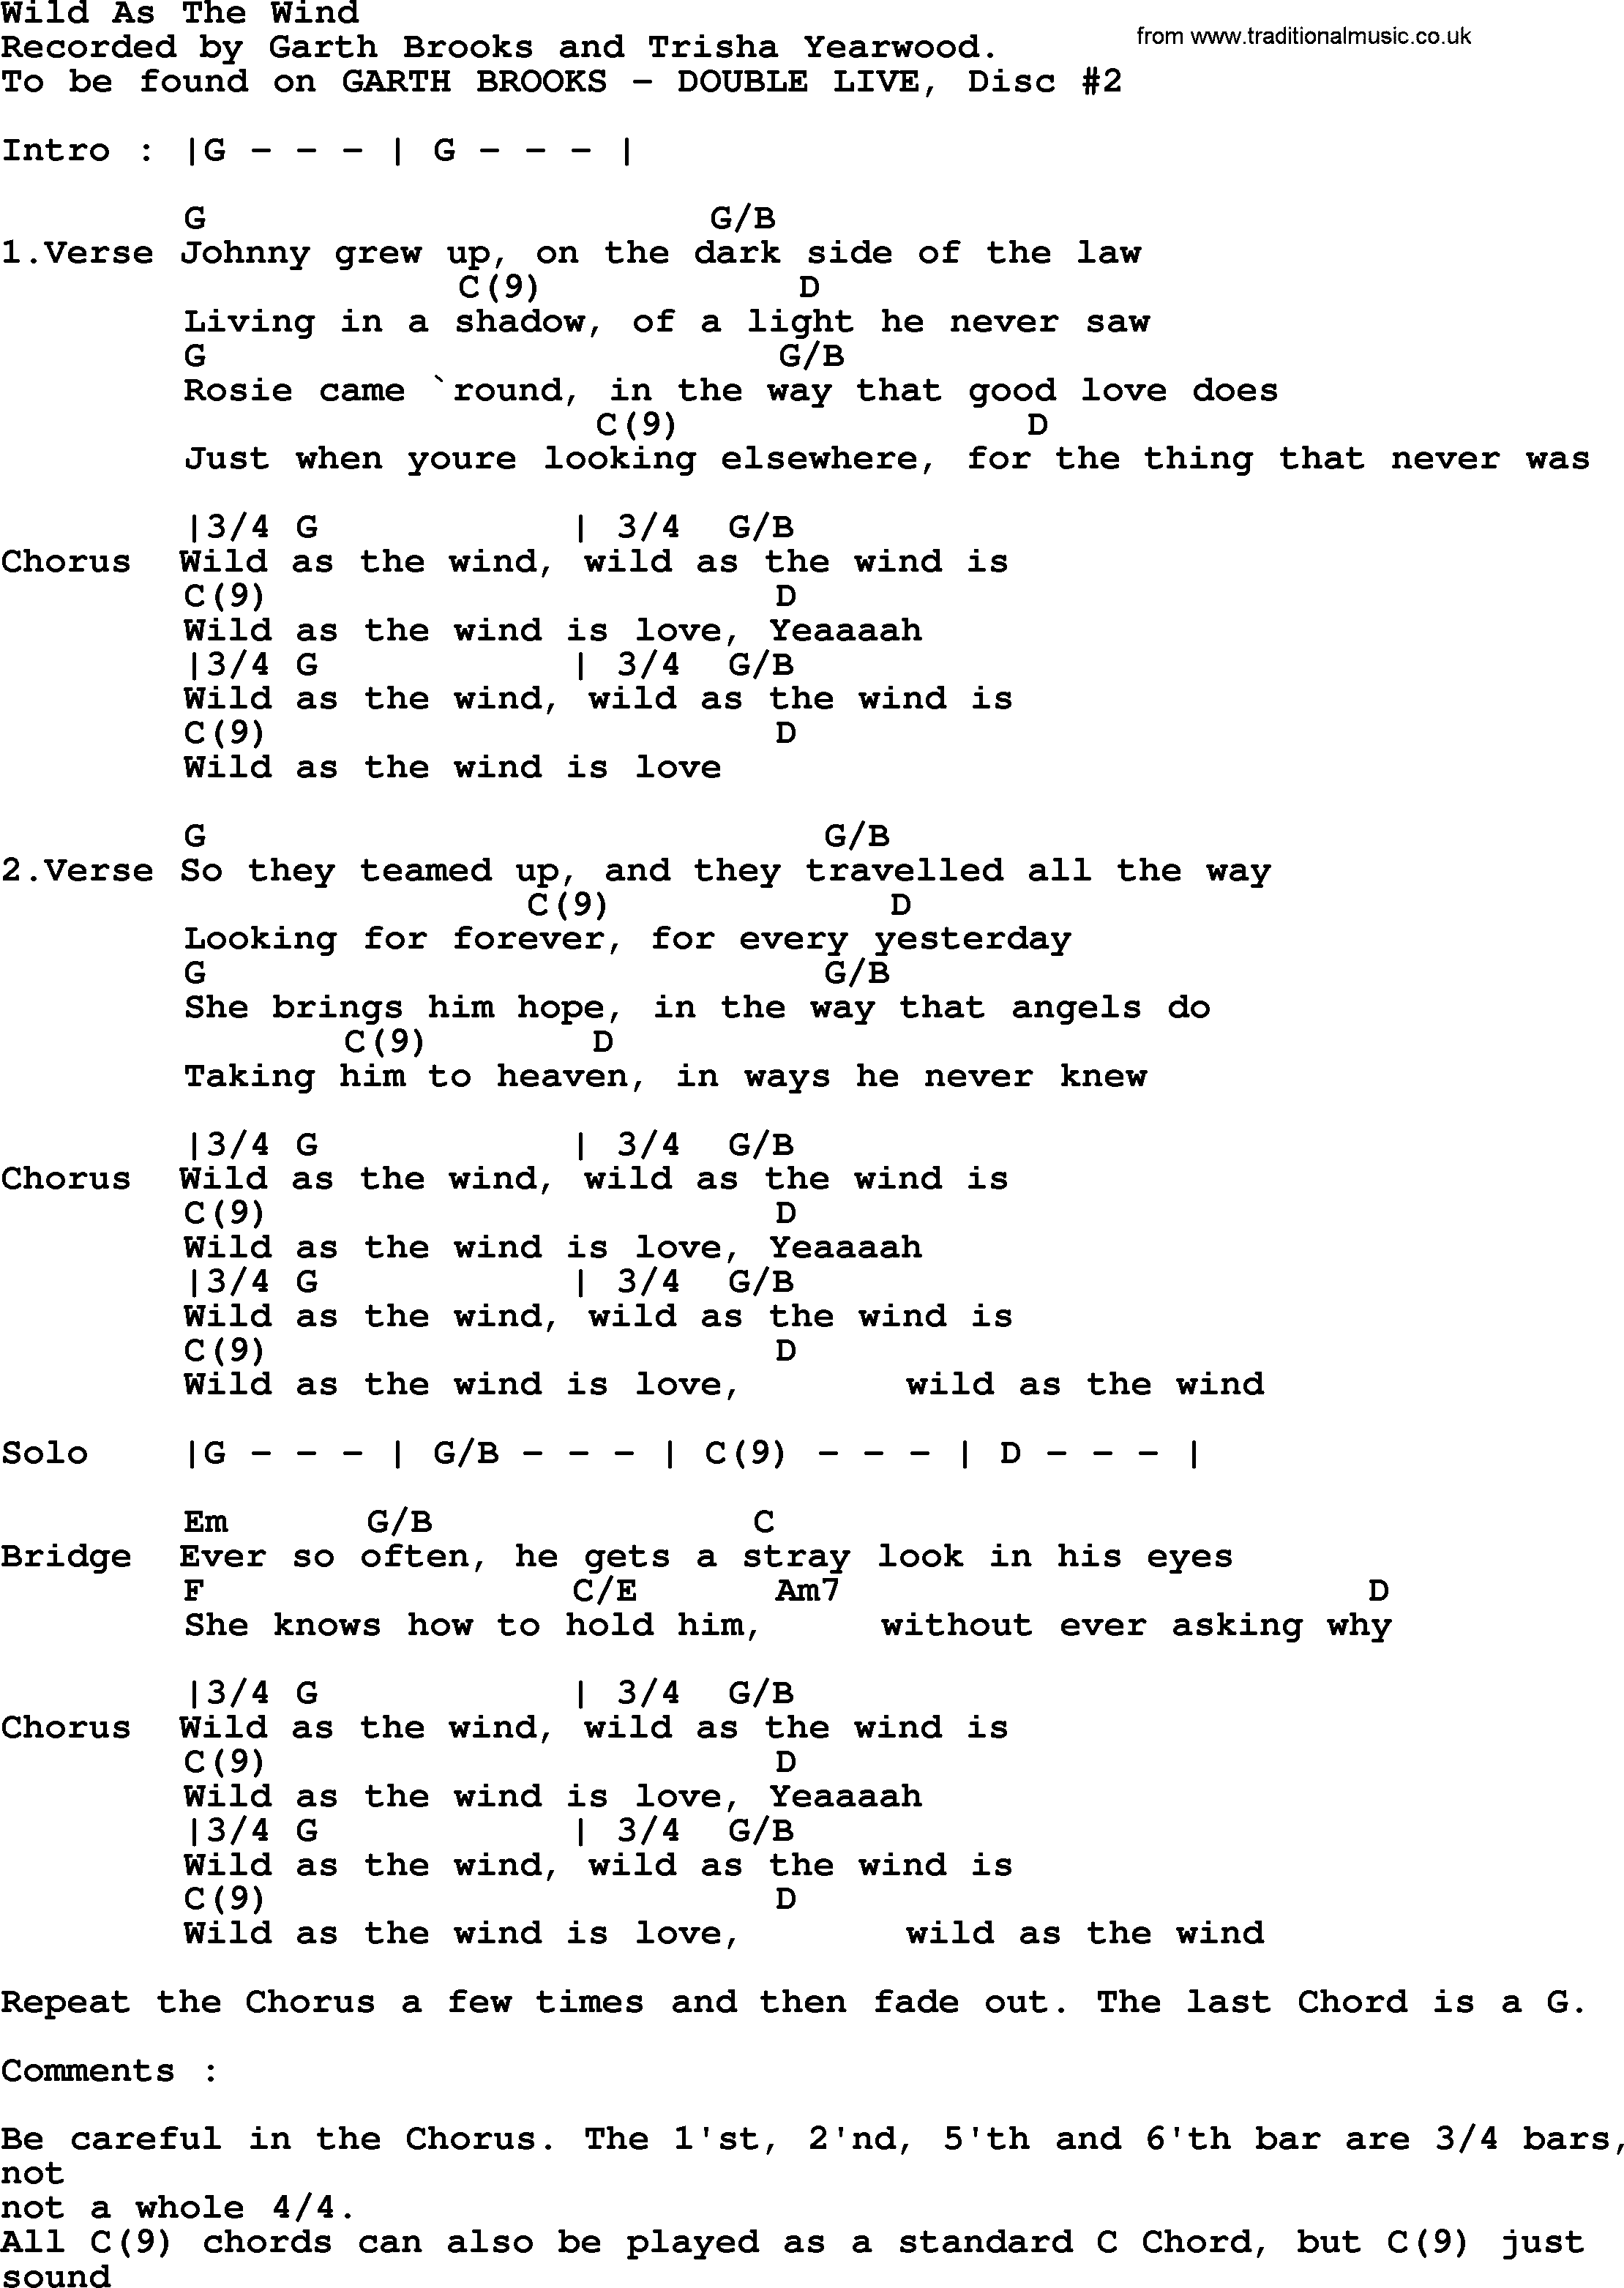 Garth Brooks song: Wild As The Wind, lyrics and chords